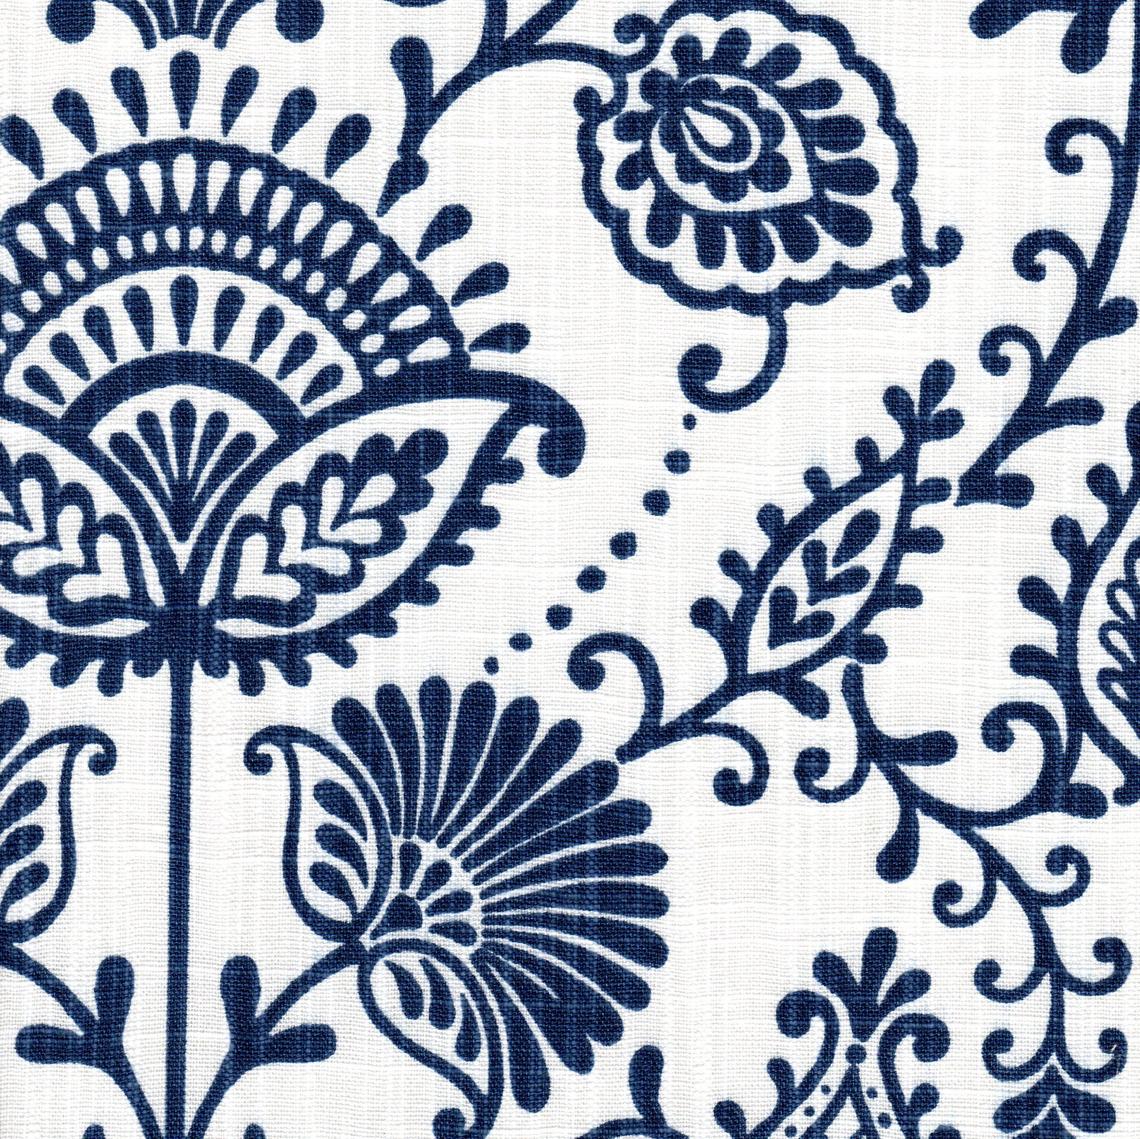 decorative pillows in silas italian denim blue country floral